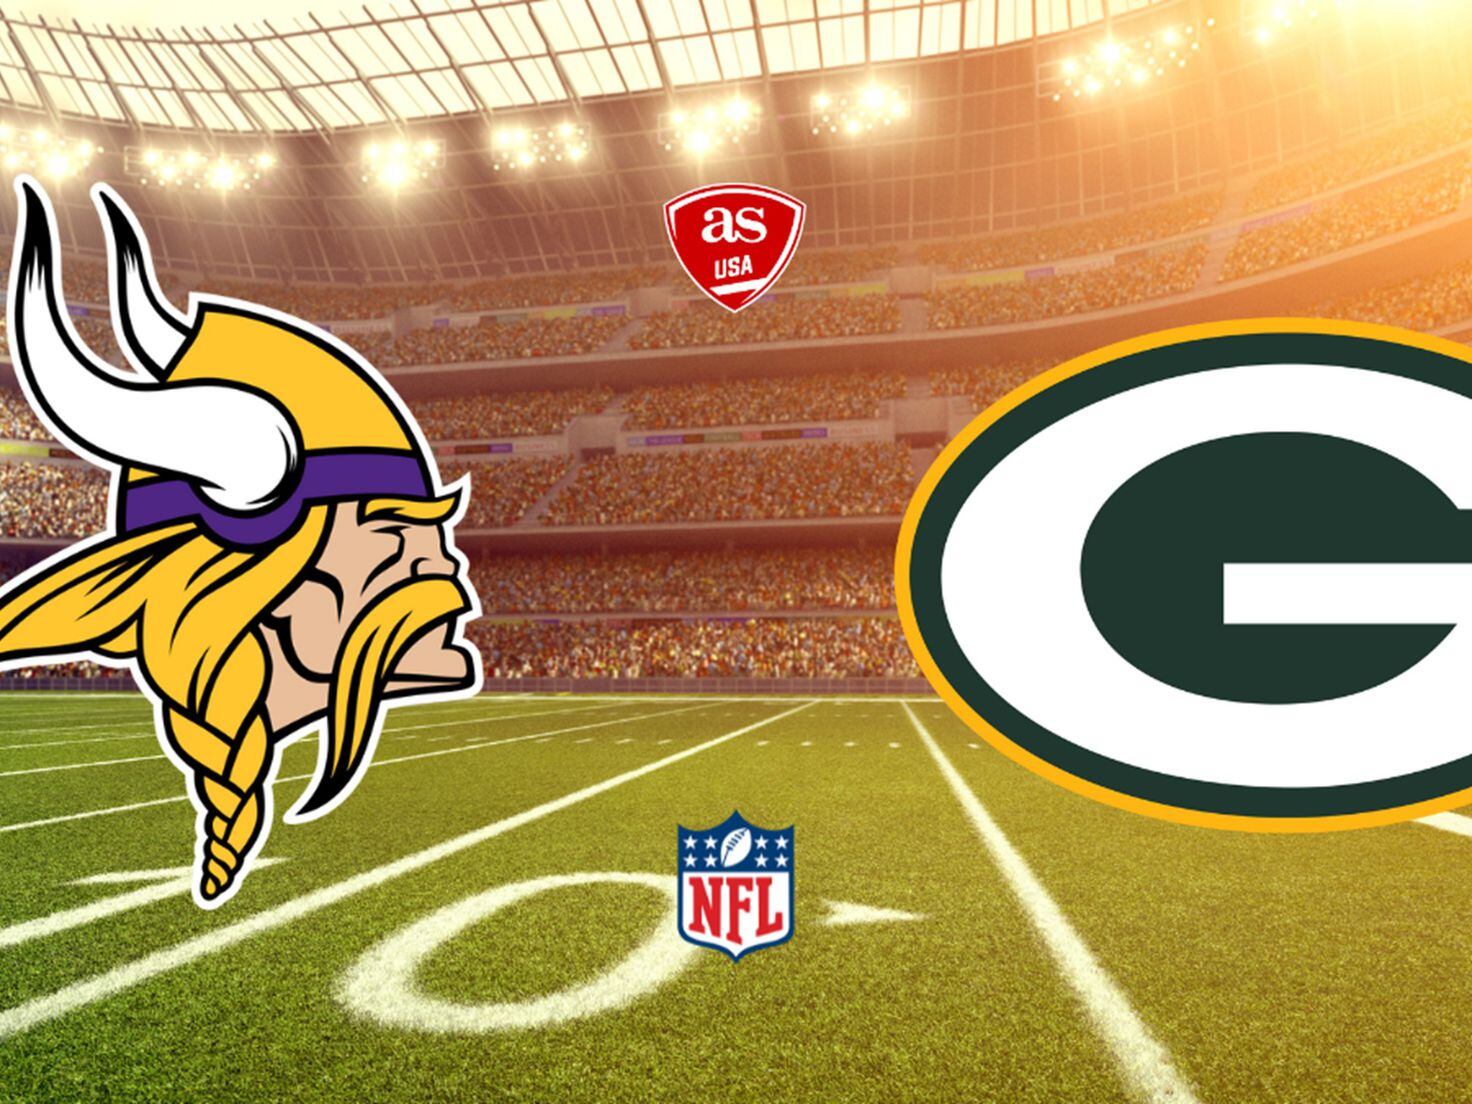 Vikings vs. Packers Livestream: How to Watch NFL Week 8 Online Today - CNET